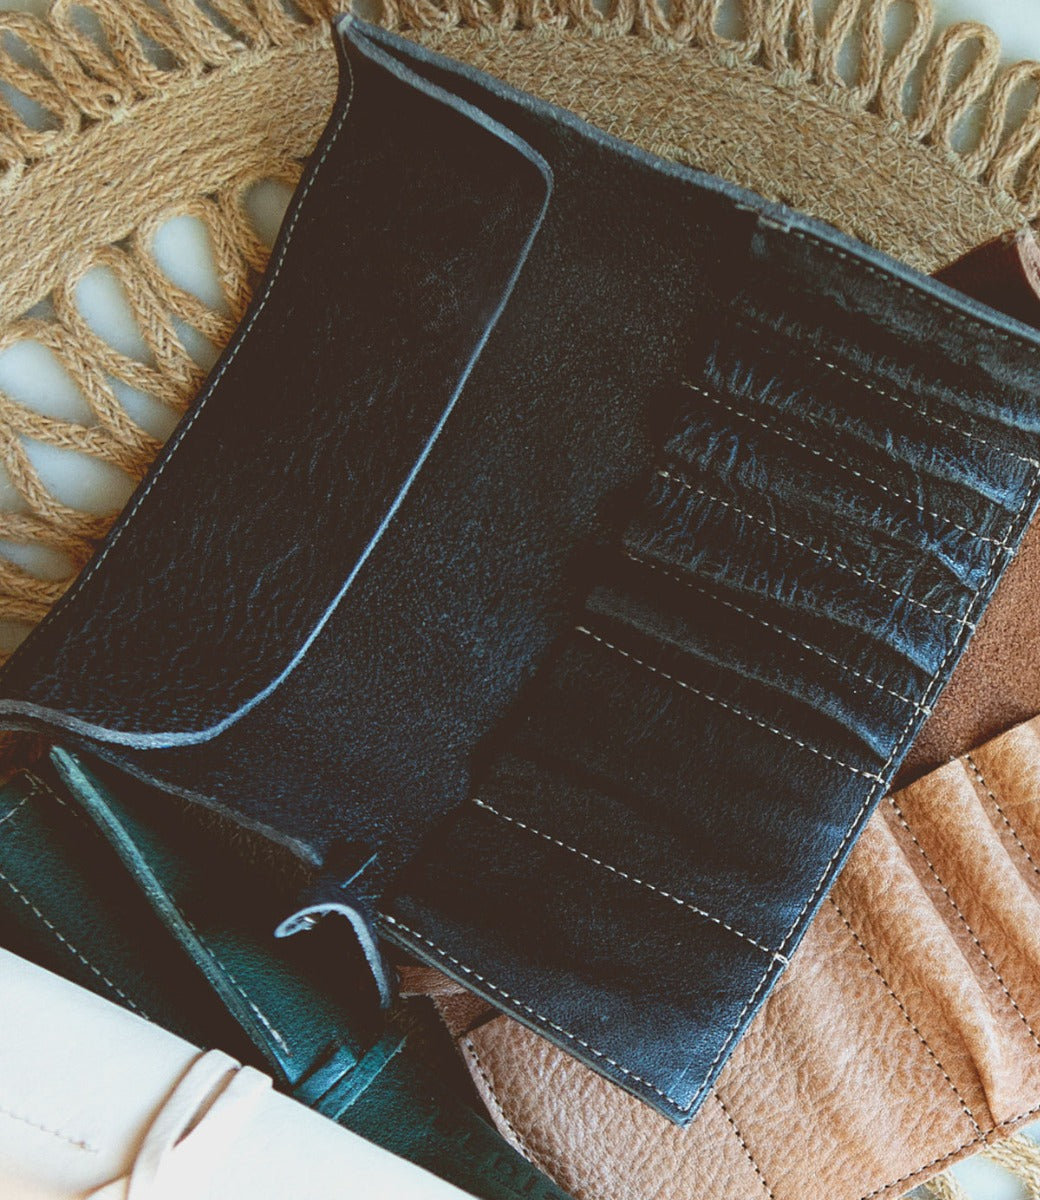 A Prepped leather wallet sitting on a wicker basket.